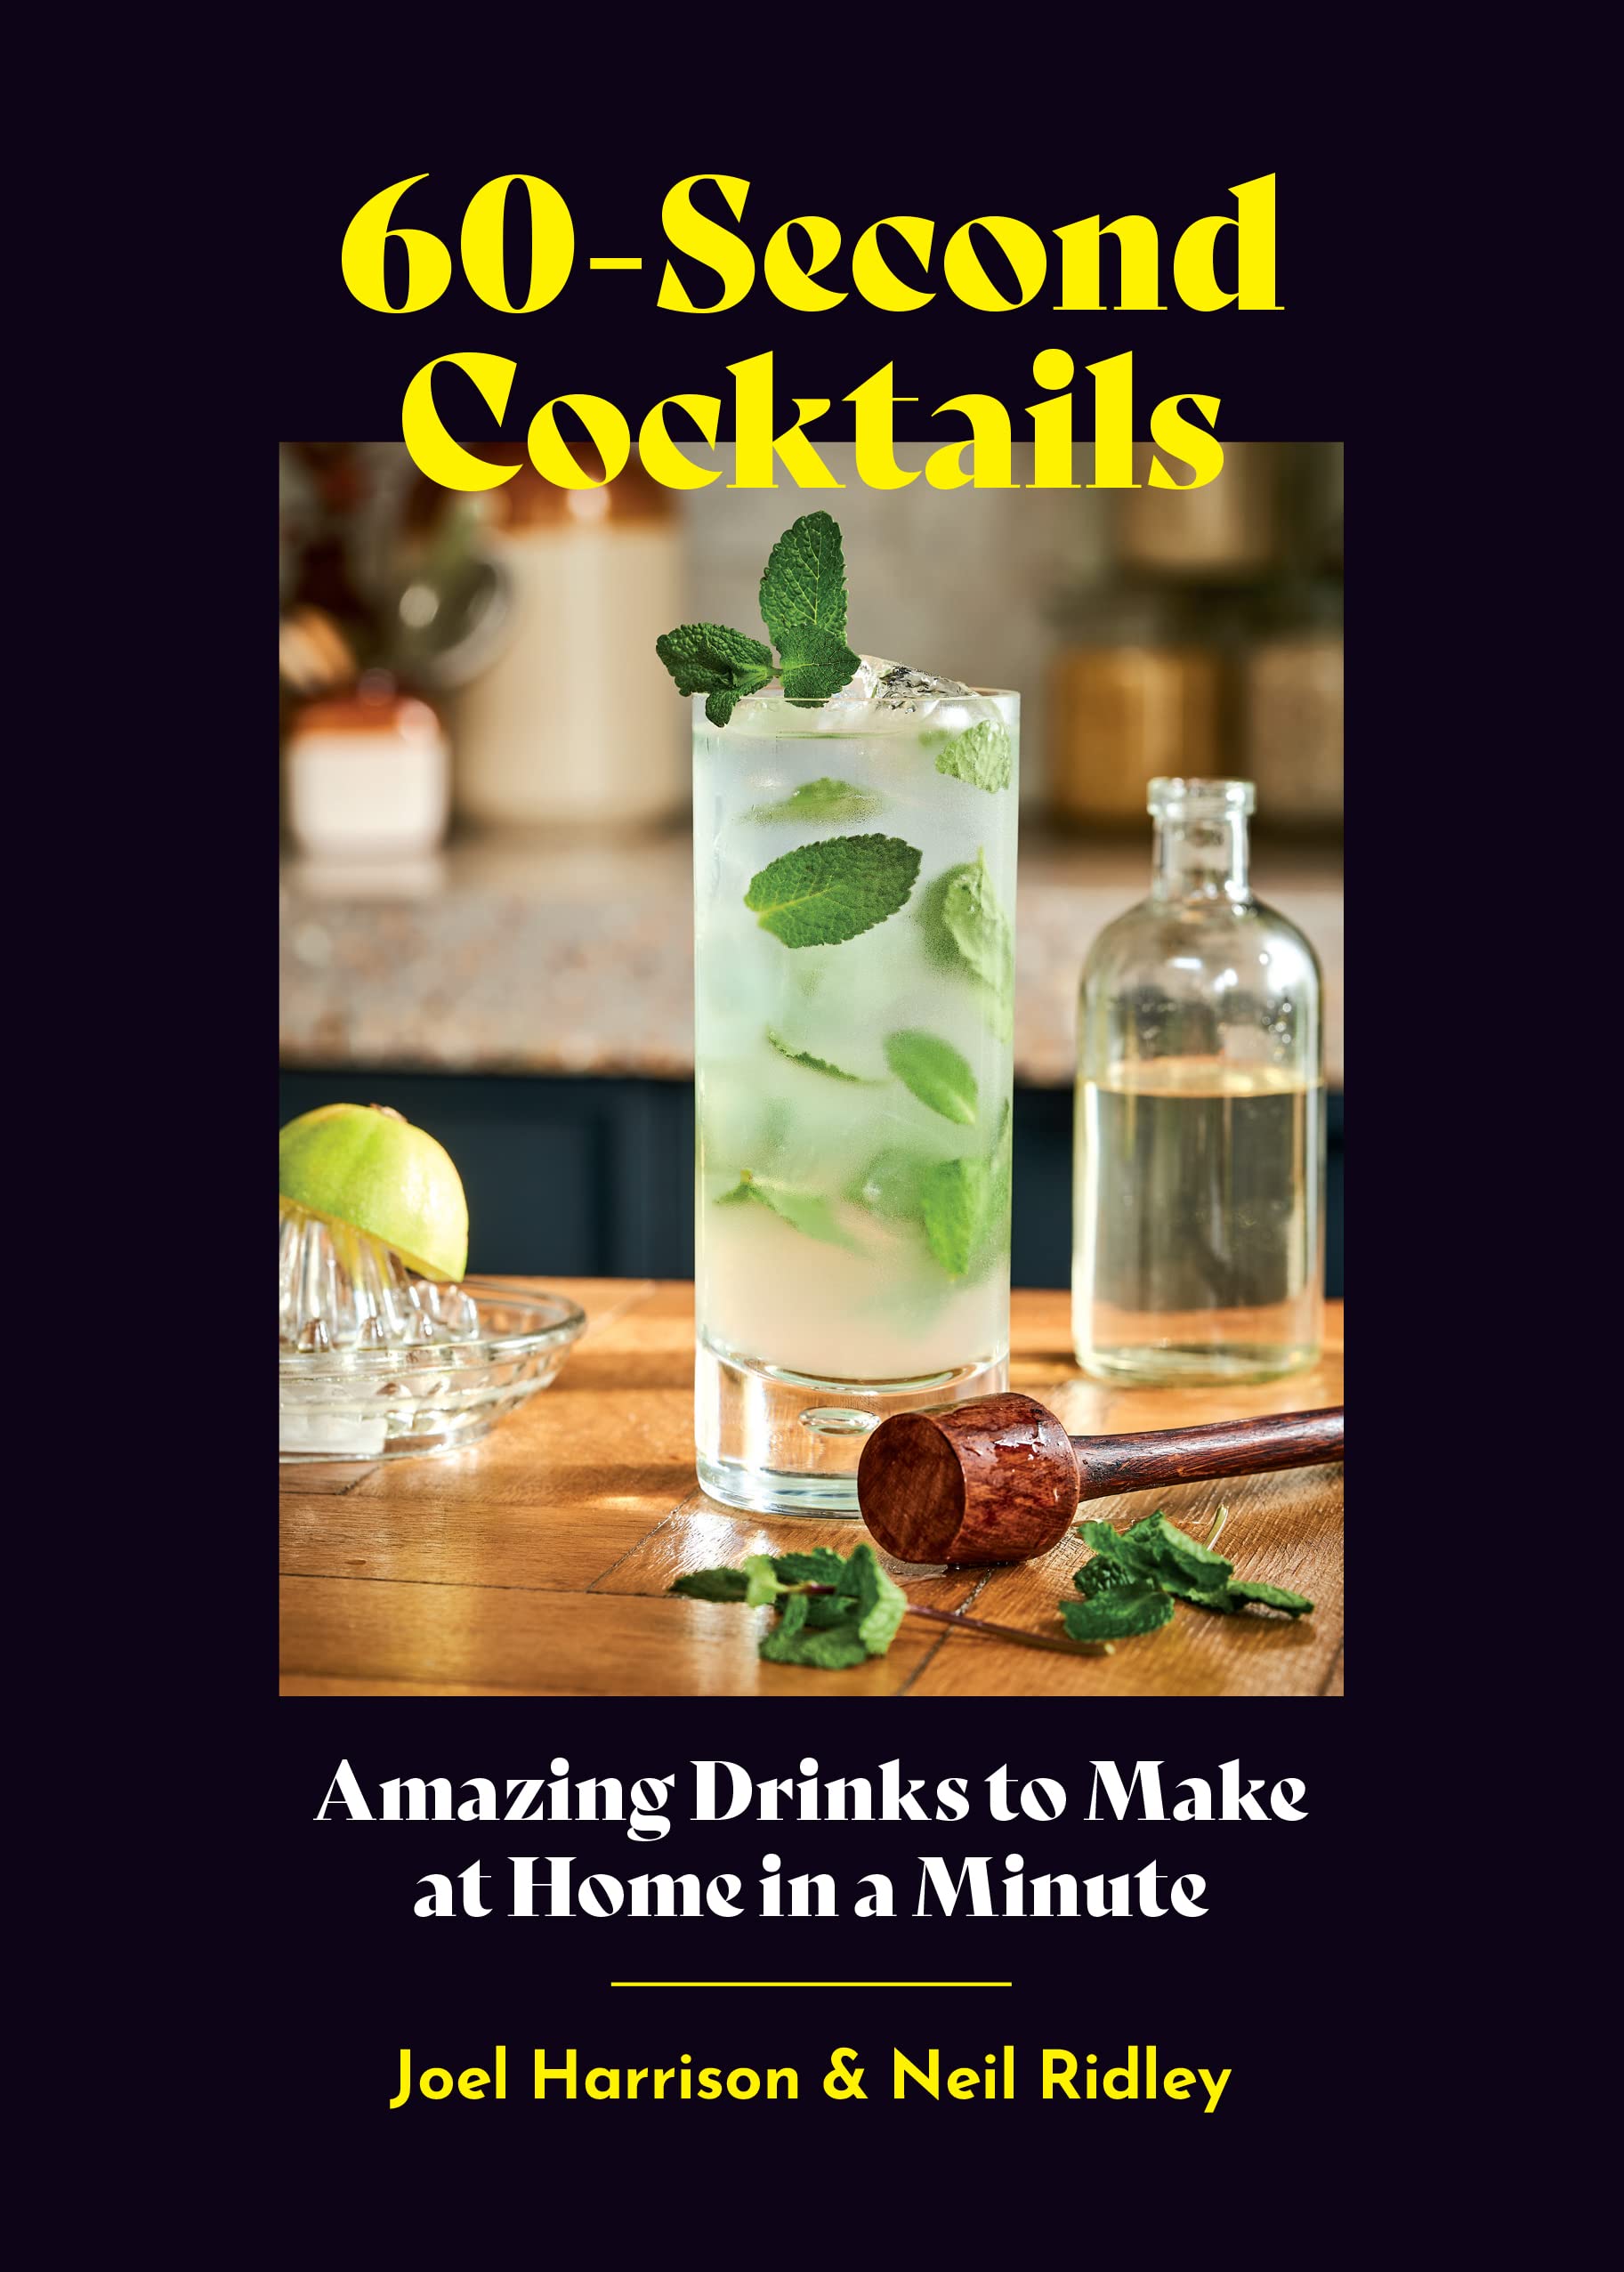 60-Second Cocktails: Amazing Drinks to Make at Home in a Minute (Joel Harrison, Neil Ridley)